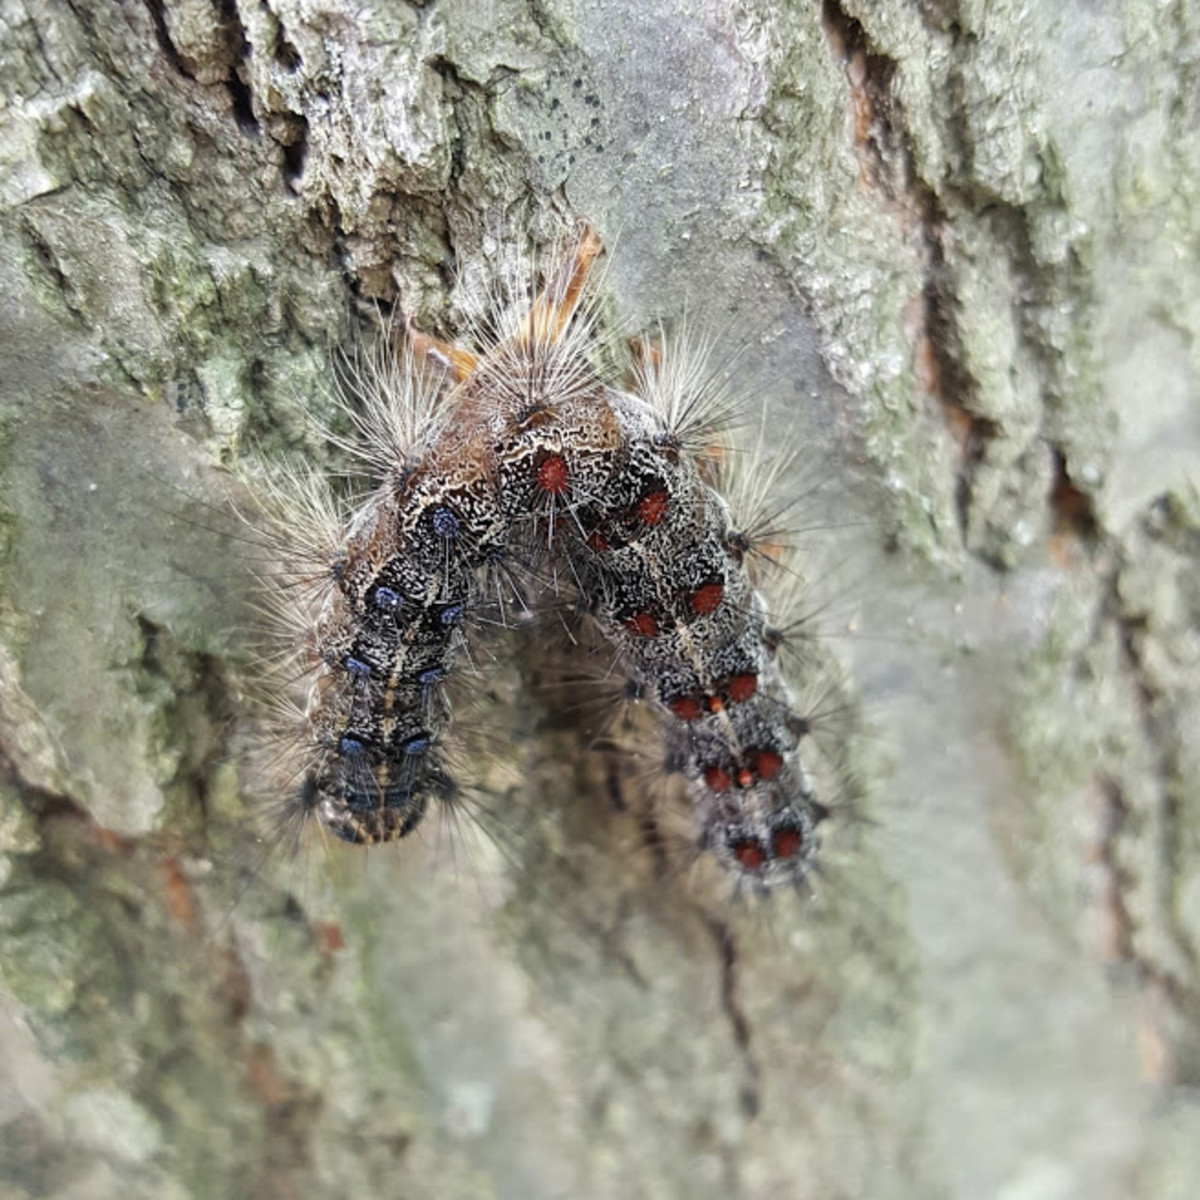 L. dispar caterpillars are susceptible to many pathogens, including viruses and fungi